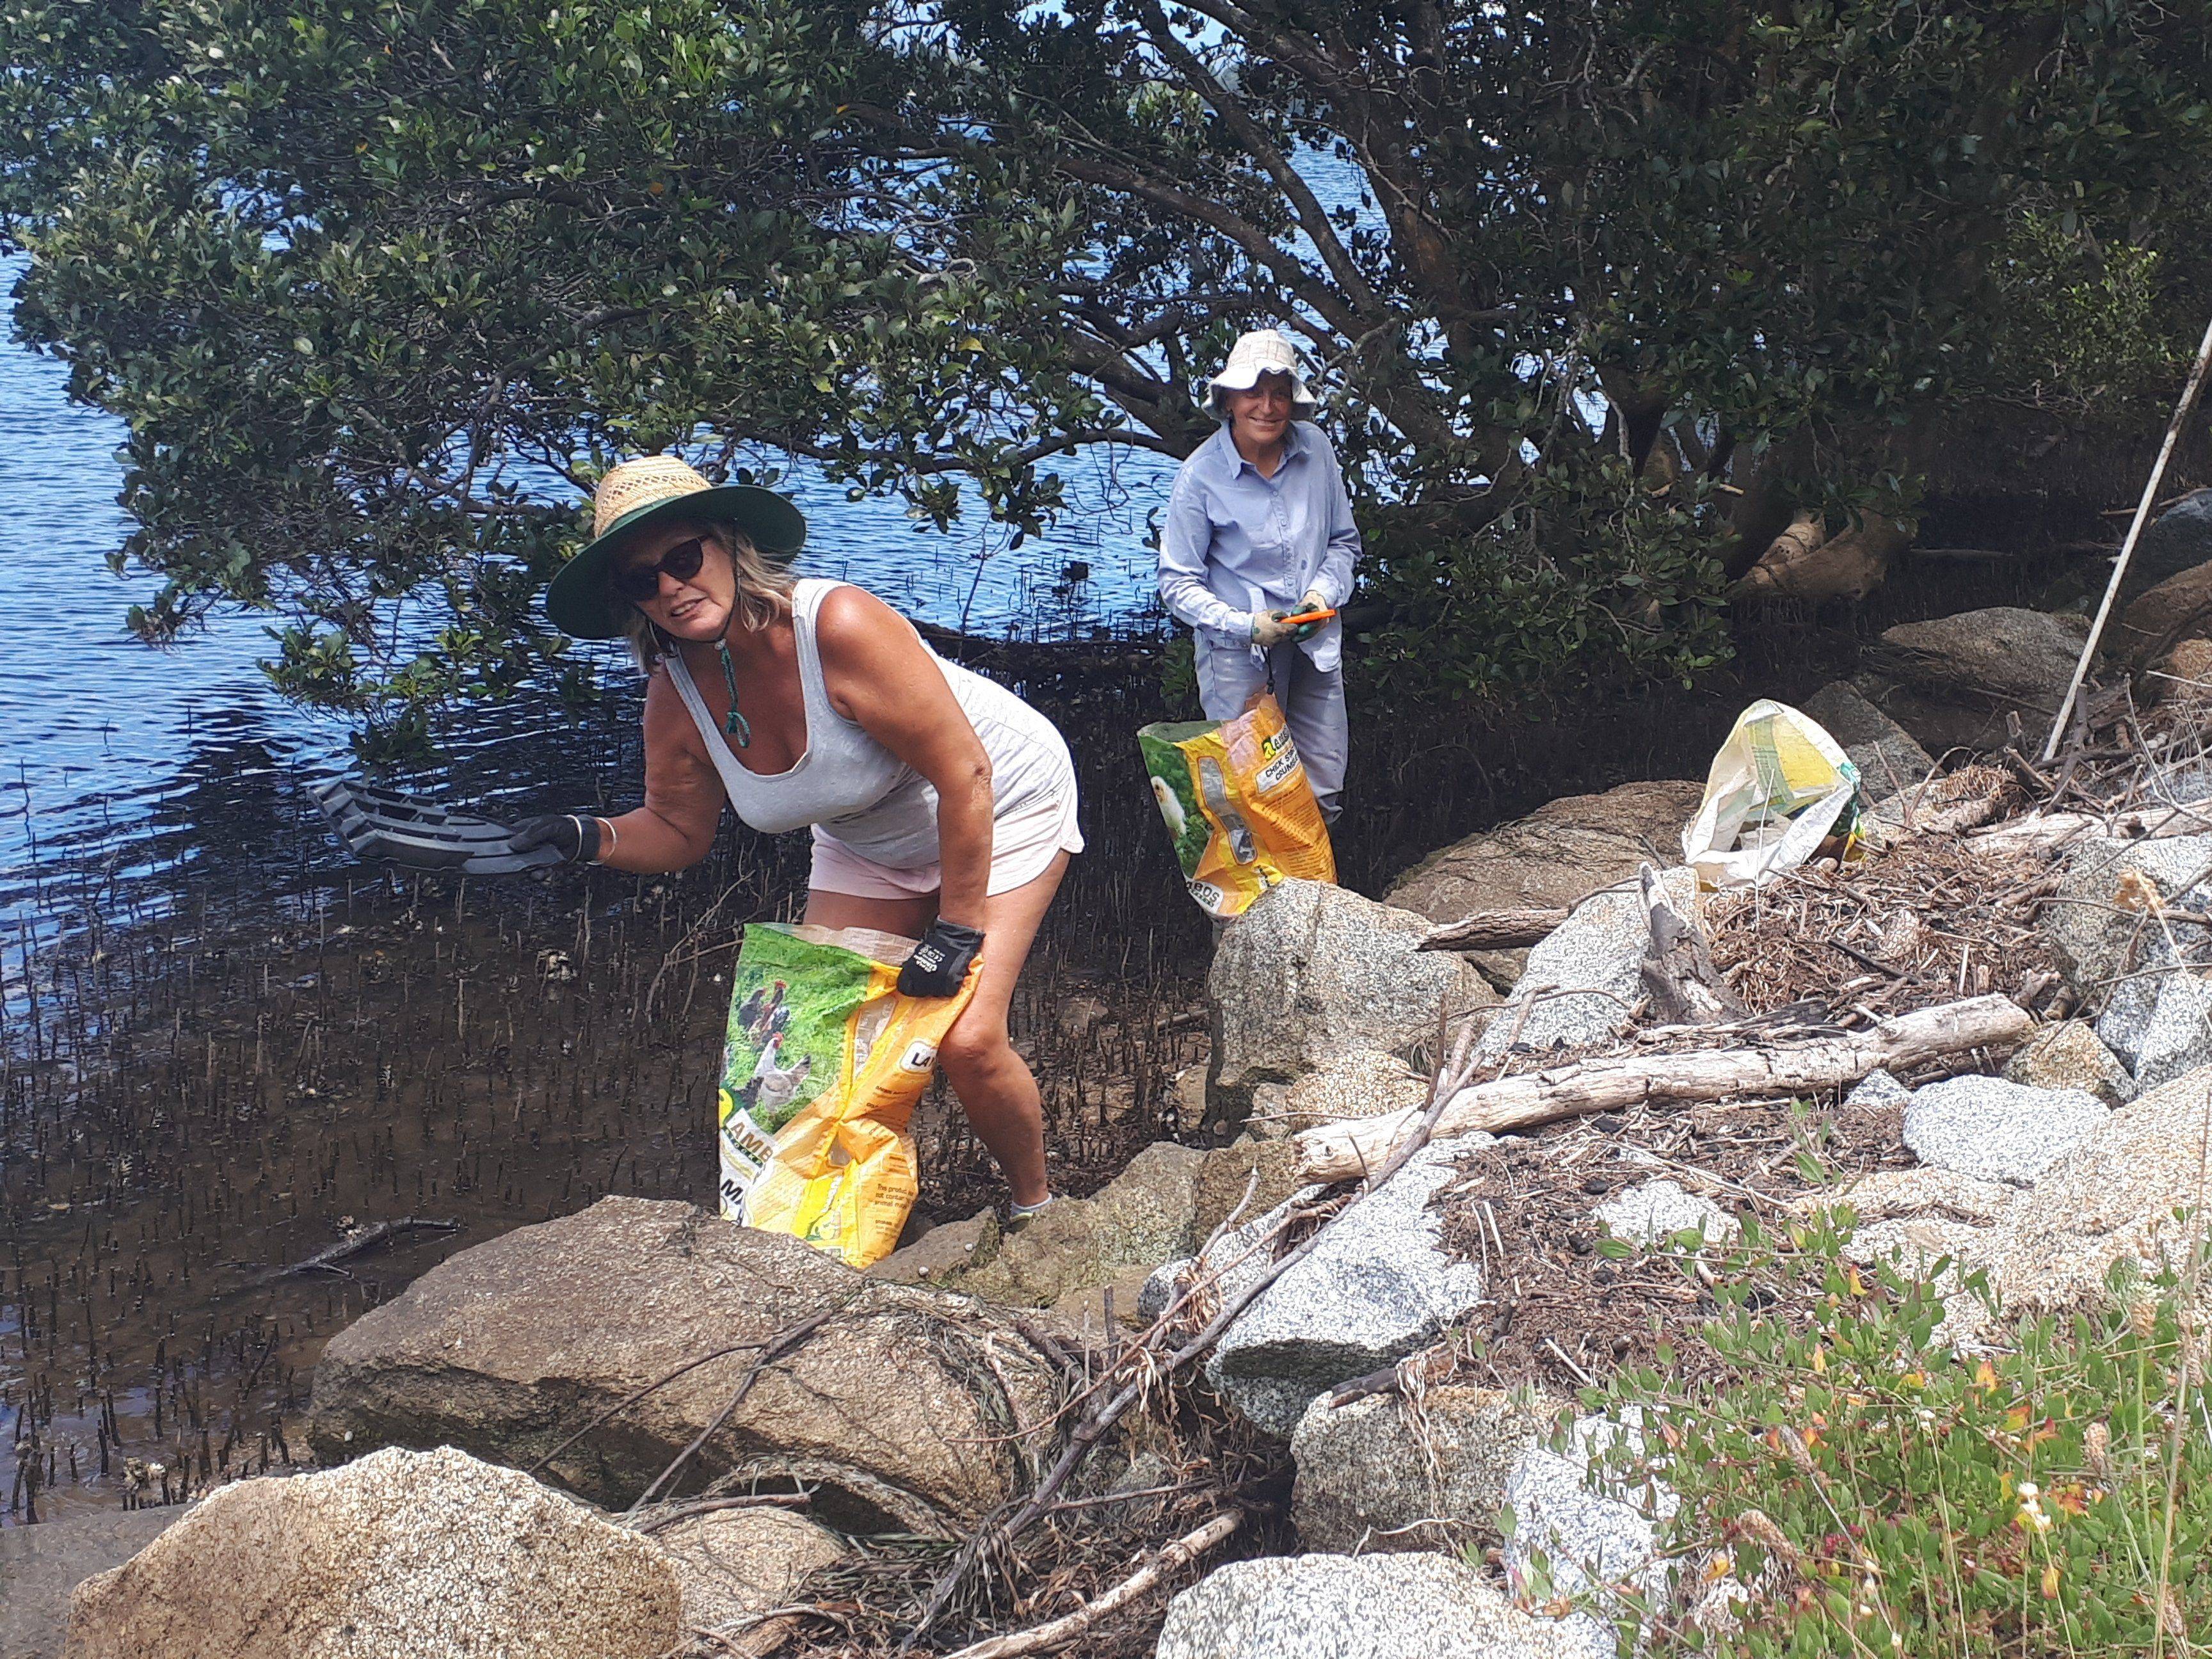 Volunteers collect rubbish from mangroves along north bank of Moruya River